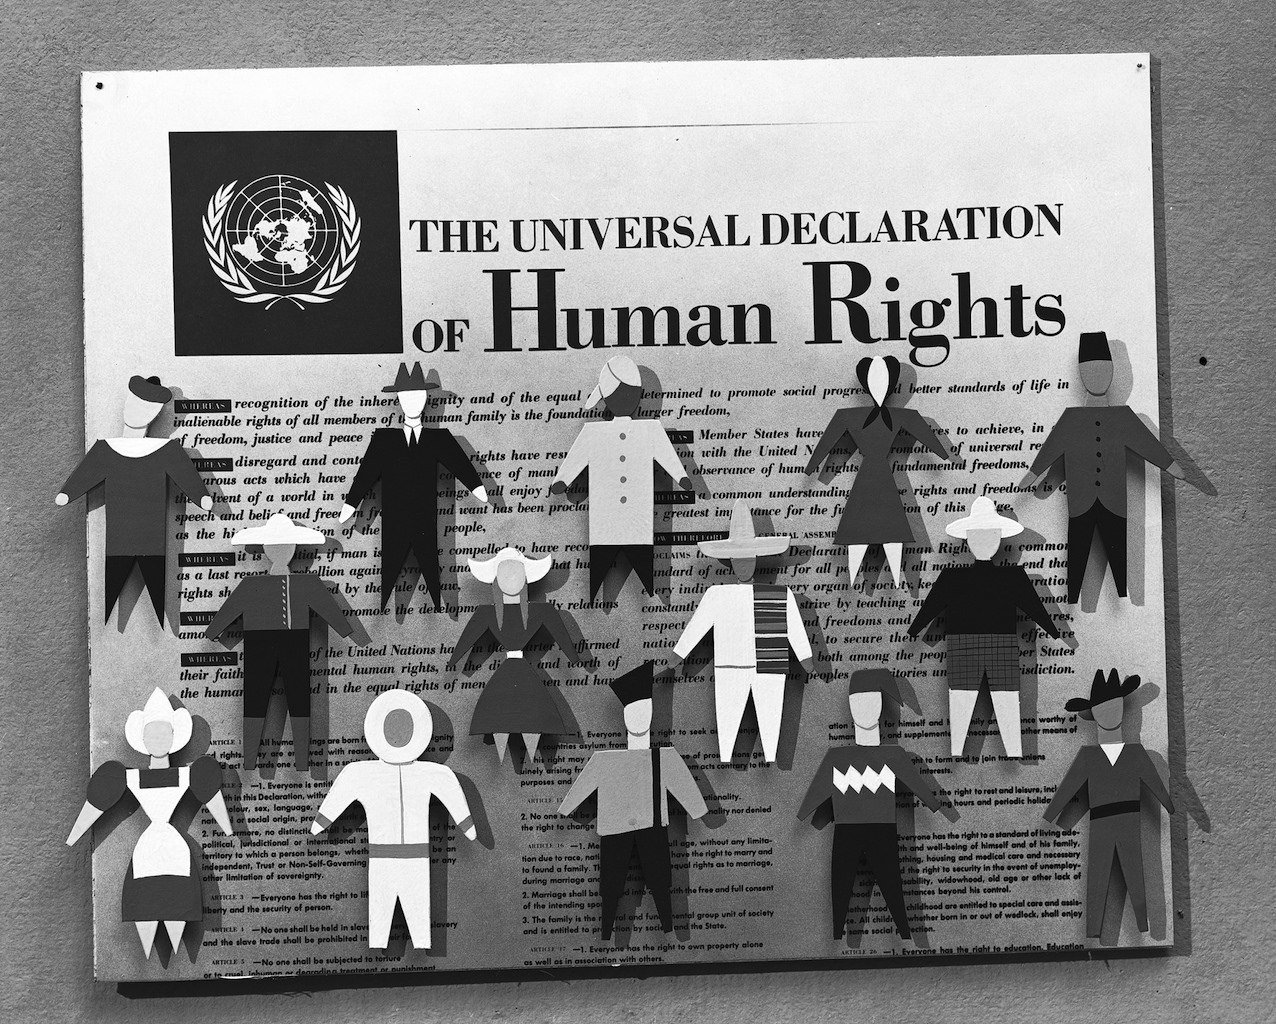 Seeing the myth in human rights